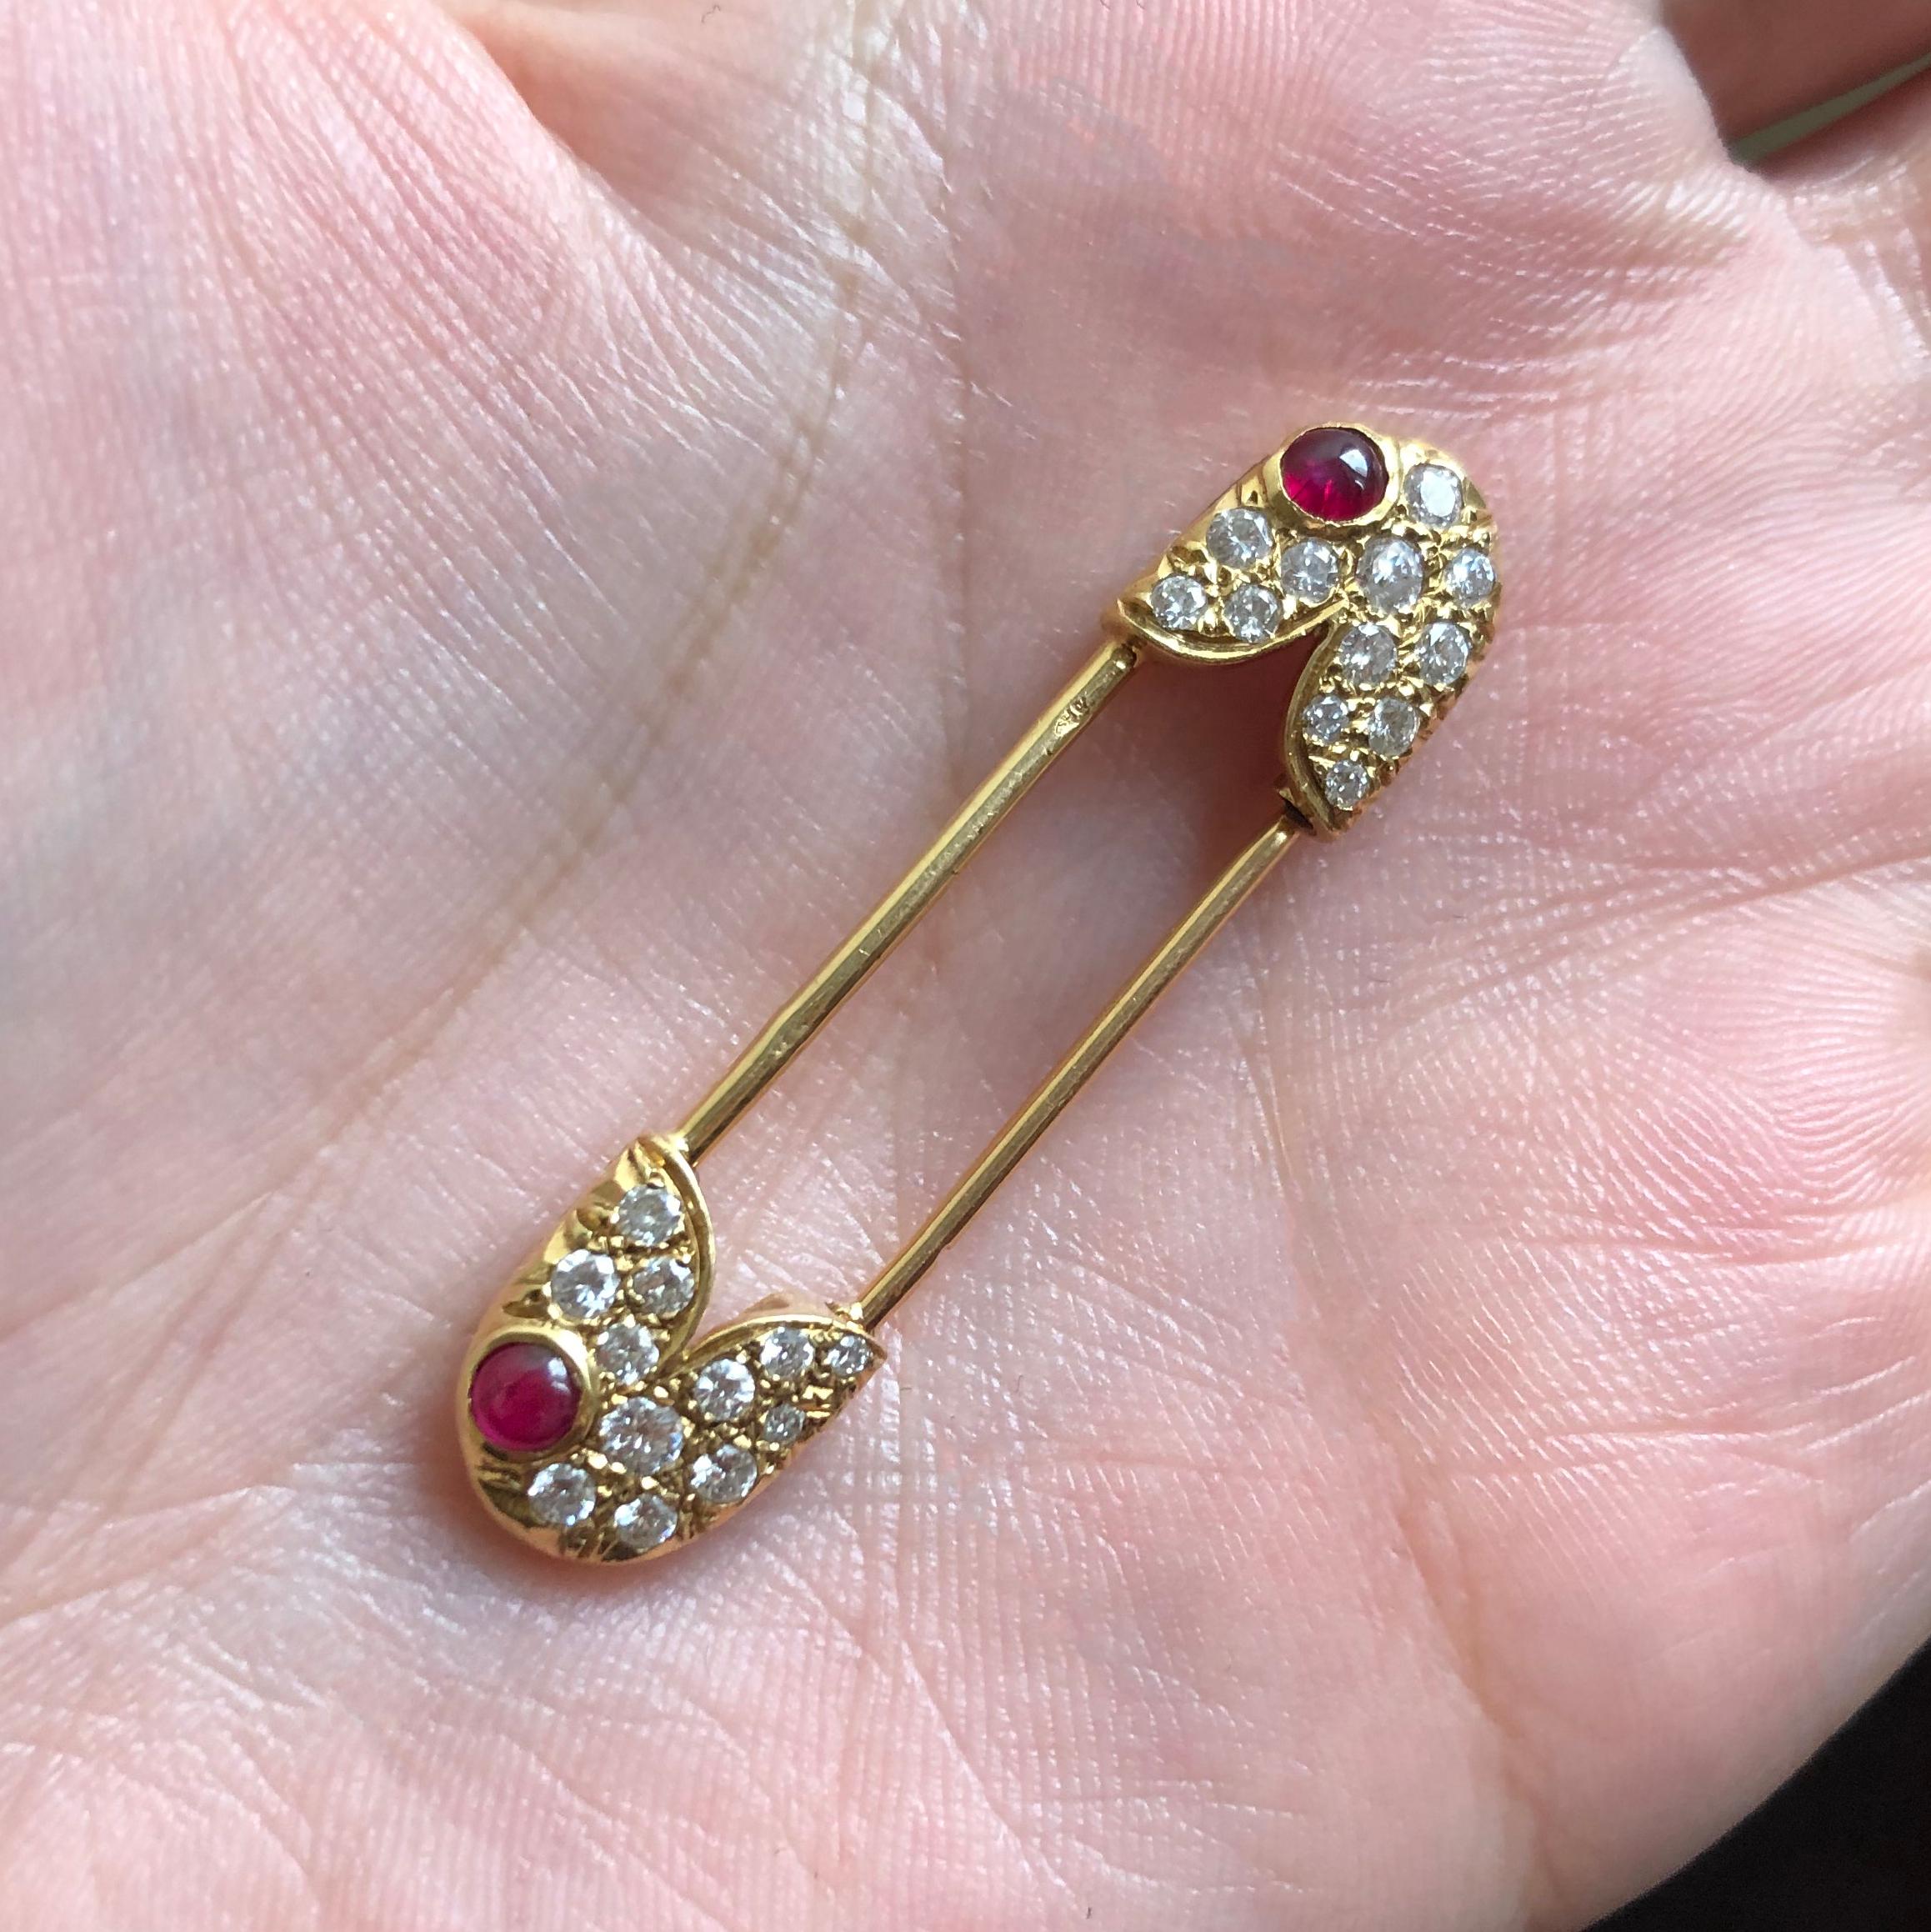 A cabochon ruby, diamond and 18 karat yellow gold safety pin, by Van Cleef & Arpels, 1978.

Signed VCA 78 and with VCA maker's mark. Stamped with copyright symbol and 750. Numbered and stamped with French hallmarks.